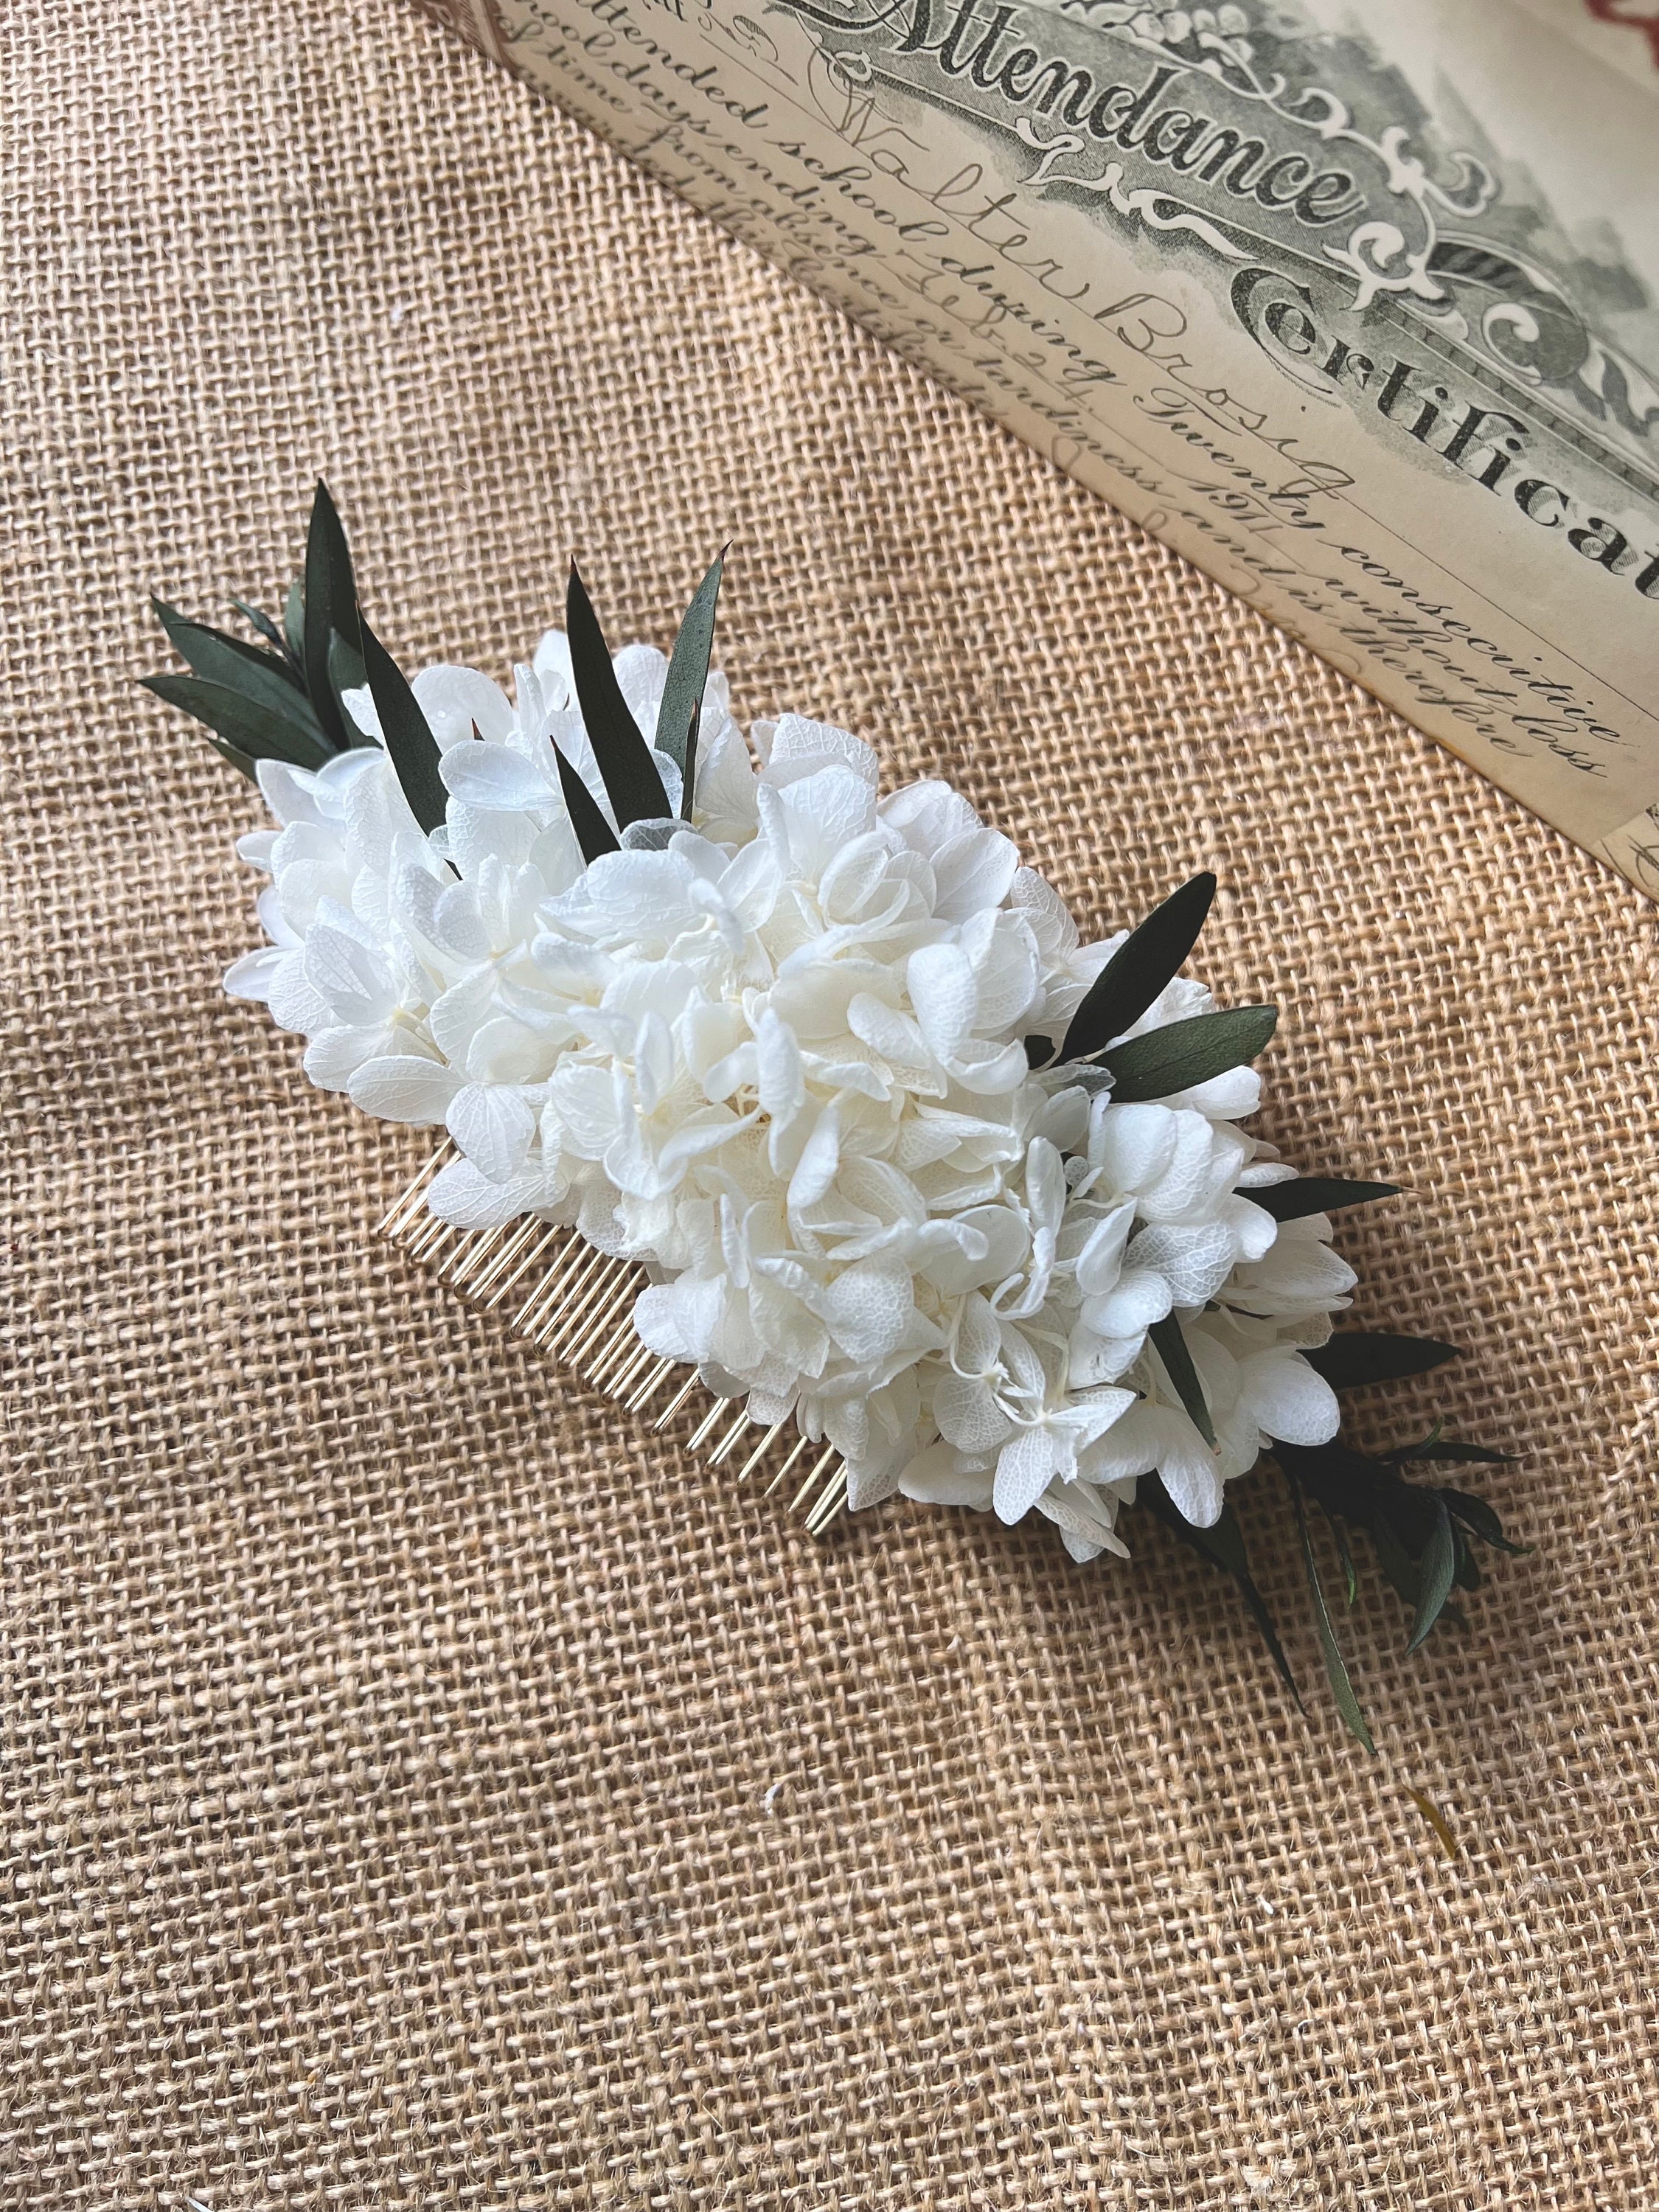 Boho Bridal White & Green Everlasting Real Flower Hair Piece, Summer Wedding Classic Bride Dried Comb, Floral Headpiece